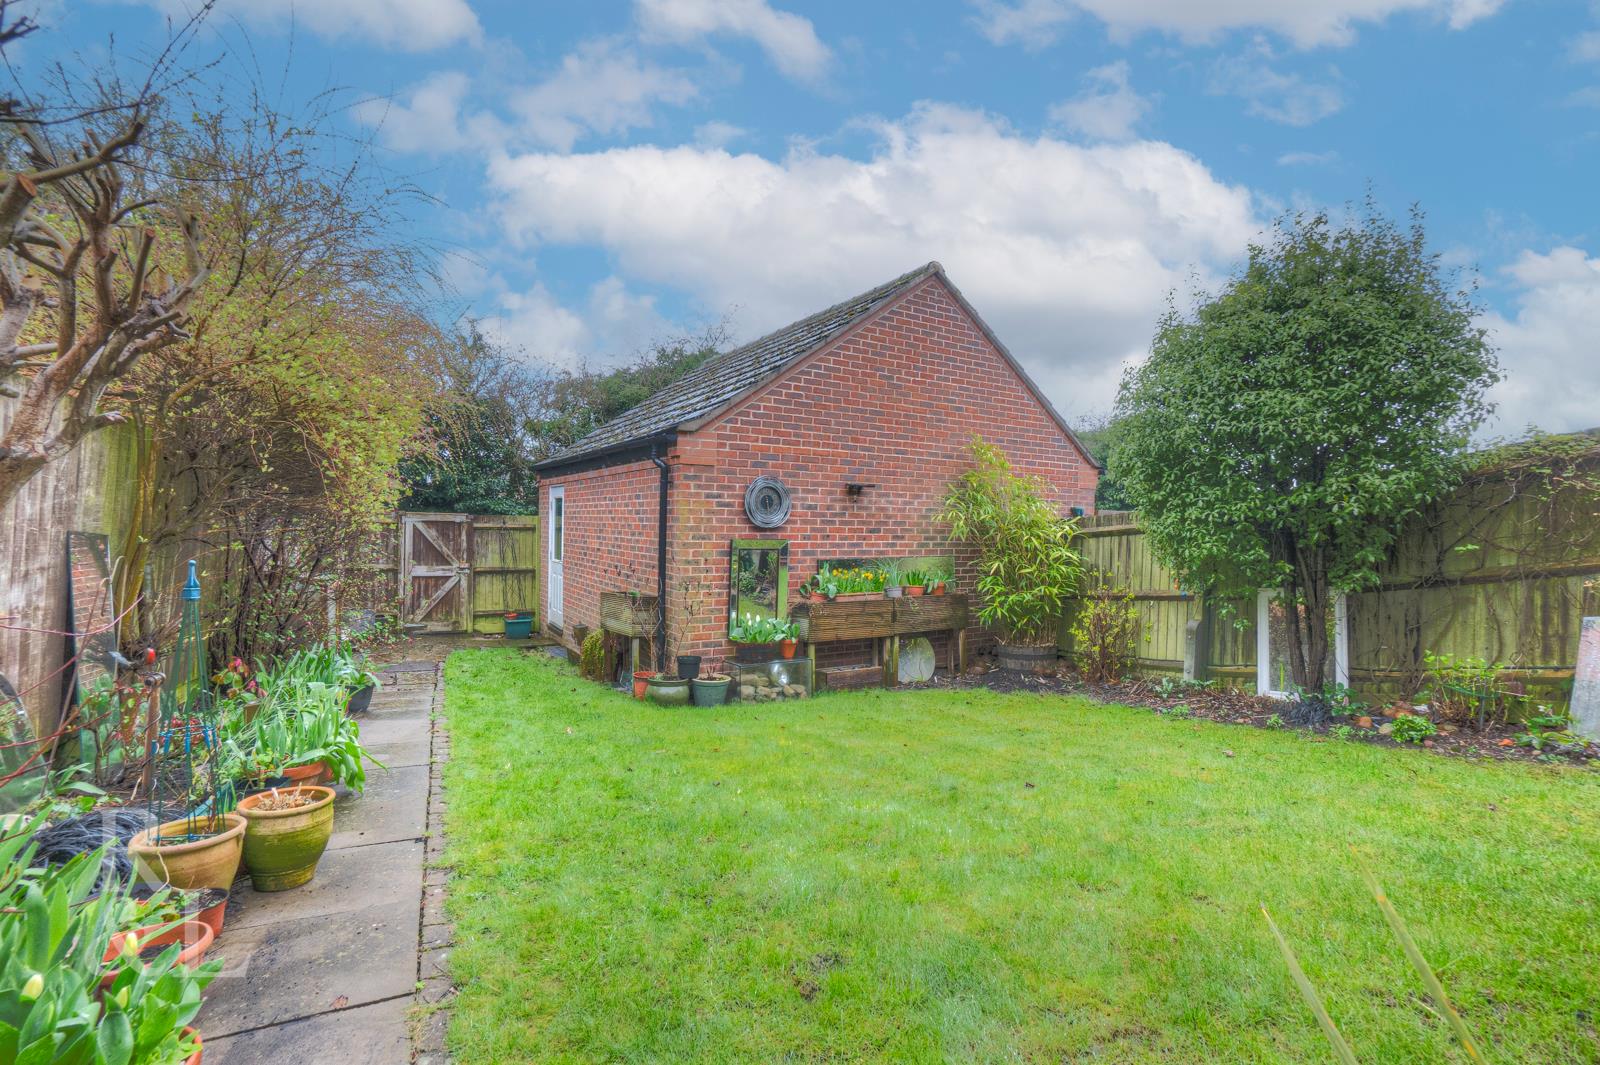 Property image for Mill Hill Leys, Wymeswold, Loughborough